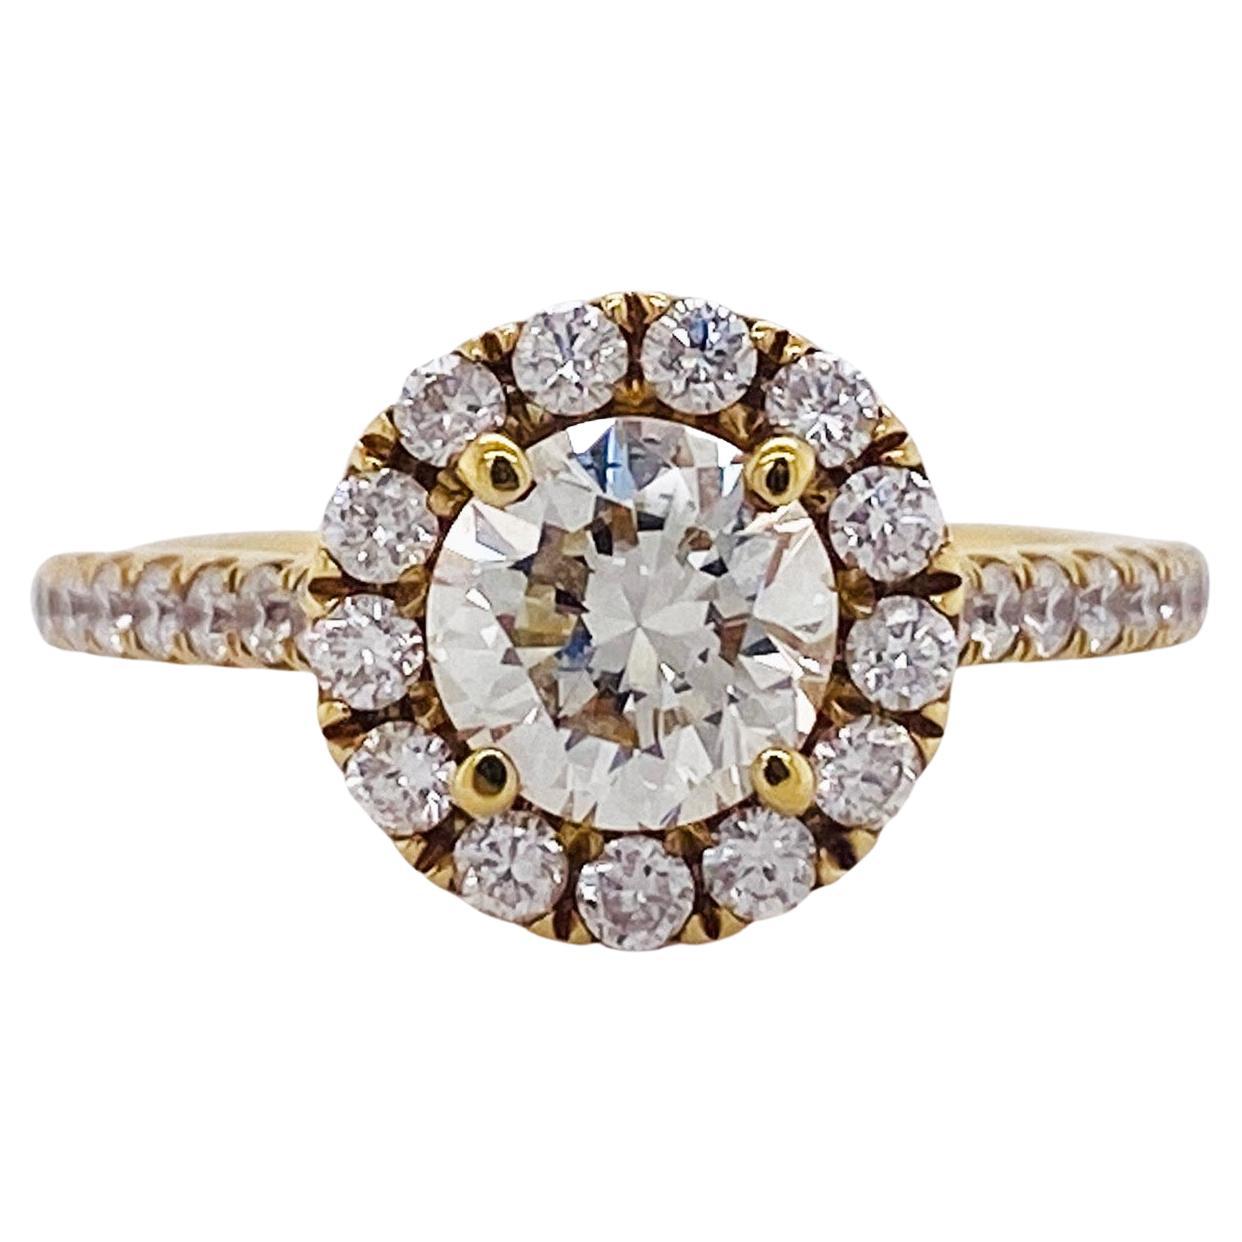 2 Carat Diamond Halo and Diamond Band Engagement Ring in 18 Karat Yellow Gold For Sale